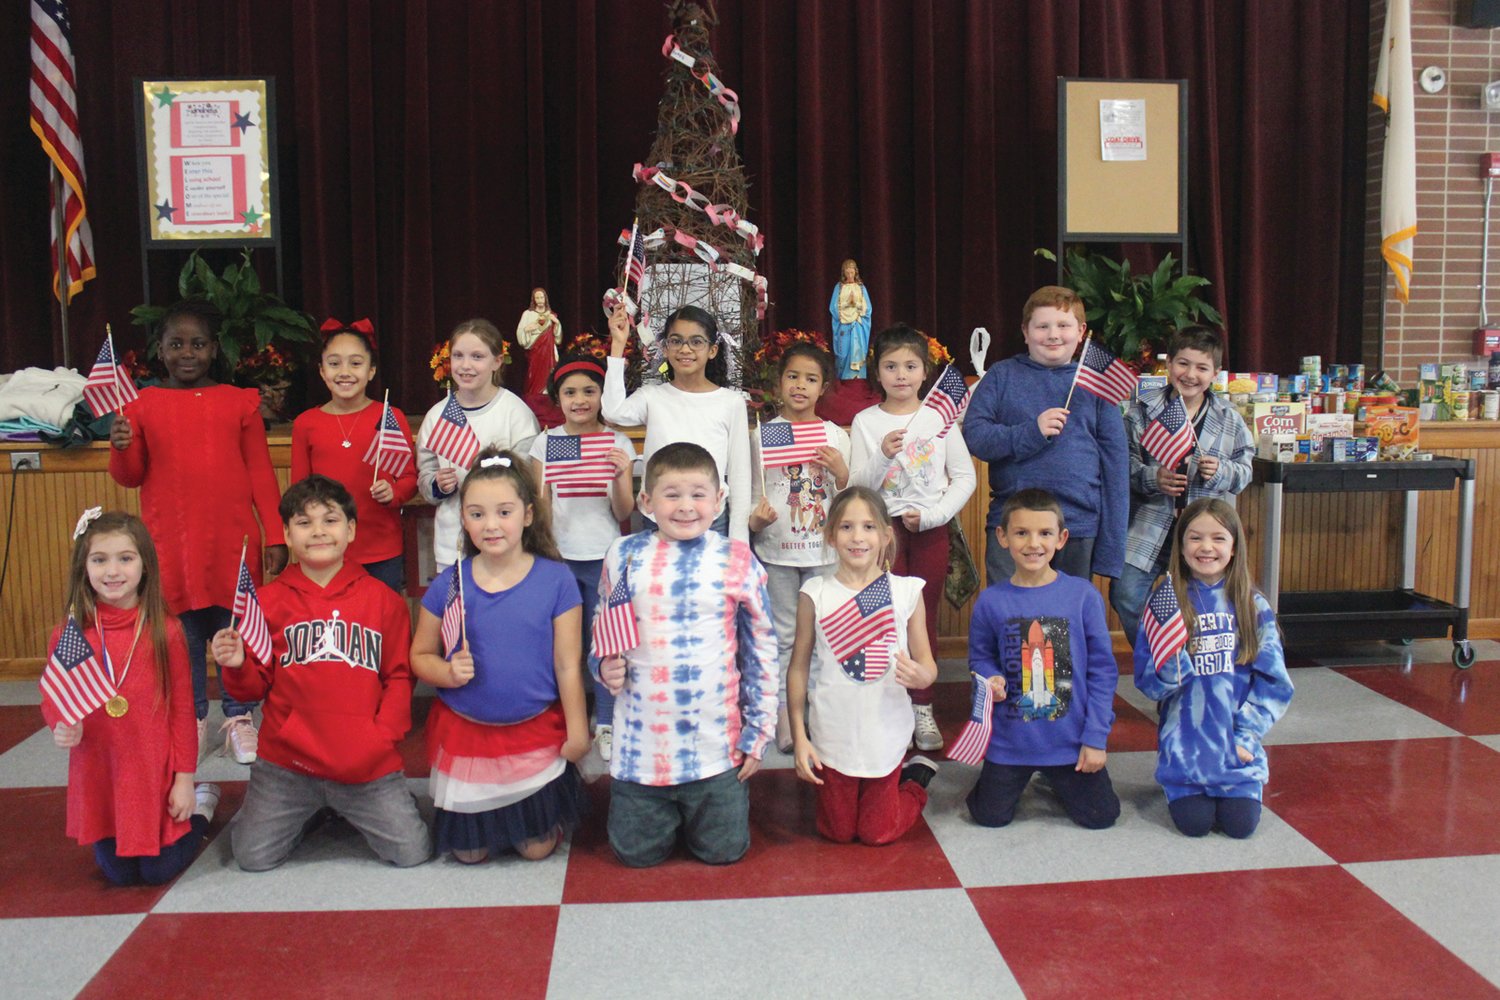 PATRIOTIC PRAYERS: St. Rocco School held its Veterans Day Prayer Service Wednesday, Nov. 9 at St. Rocco Church, 931 Atwood Ave., Johnston. Students from St. Rocco School read poems that they wrote, carried photos of loved ones, sang patriotic songs and prayed for all veterans.  Also, the school held a “Dress Down Day” for "Operation Christmas Stocking" where students dressed in red, white and blue, along with donating a dollar for the cause. Proceeds will go toward filling stockings for soldiers in the 43rd MP Brigade.